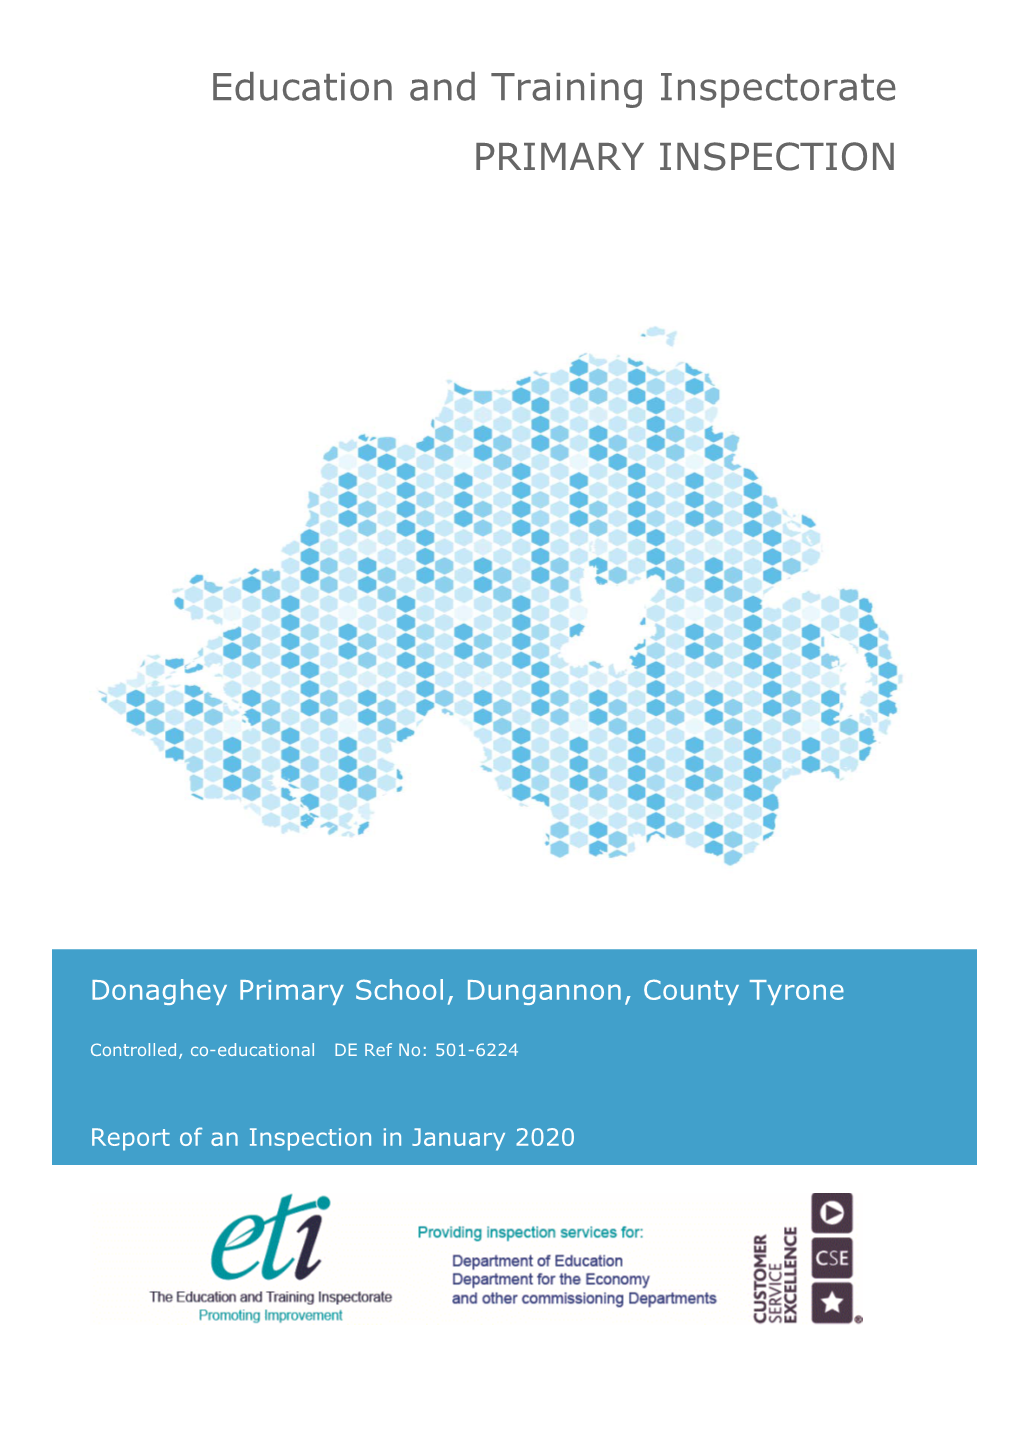 Donaghey Primary School, Dungannon, County Tyrone